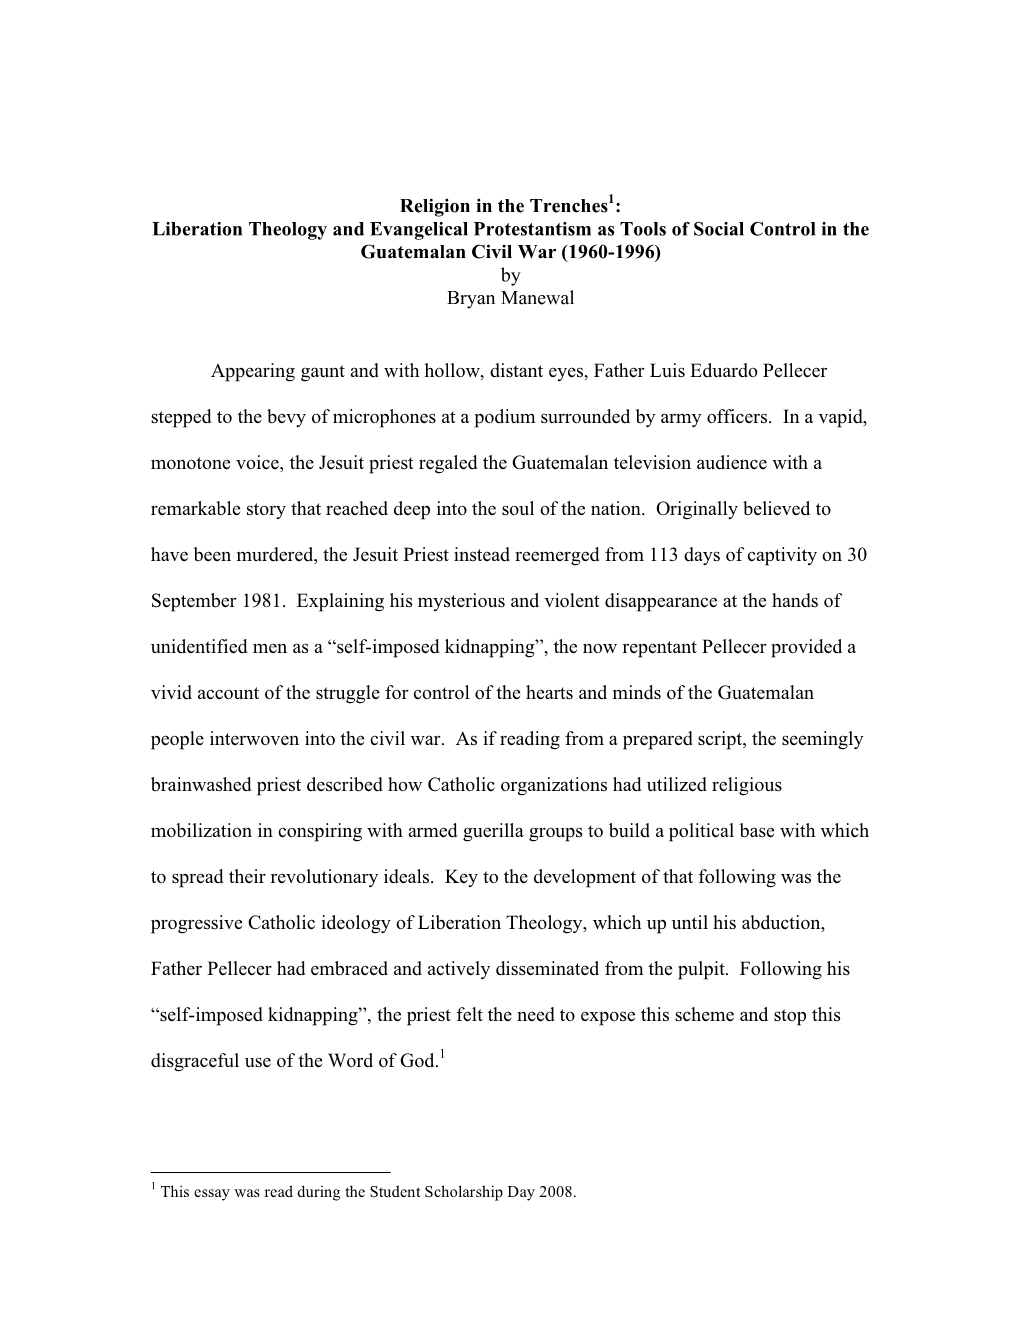 Religion in the Trenches1: Liberation Theology and Evangelical Protestantism As Tools of Social Control in the Guatemalan Civil War (1960-1996) by Bryan Manewal